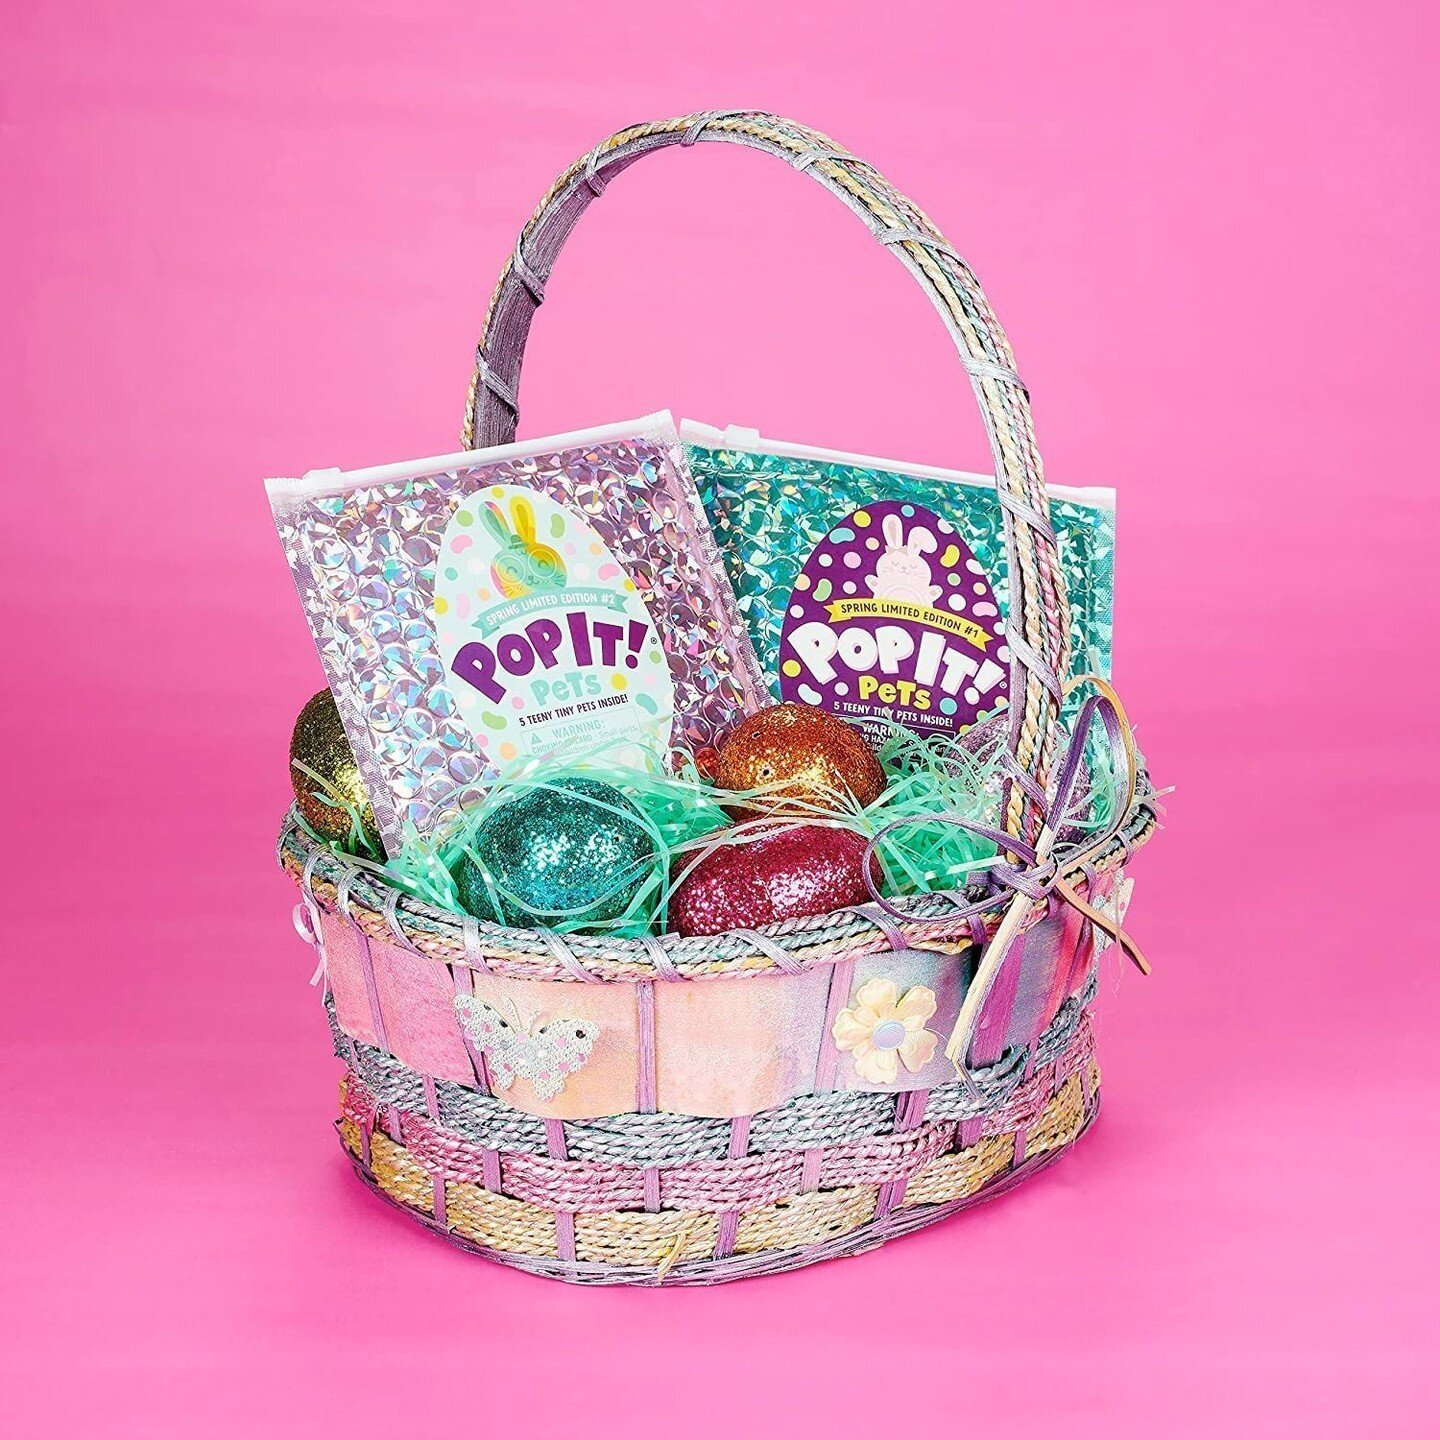 The Spring Limited Edition Pop It Pets Packs are perfect Easter basket fillers, great for spring birthdays, or just a little pick-me-up to make someone smile! 😊 

Now available at Target and on Amazon!